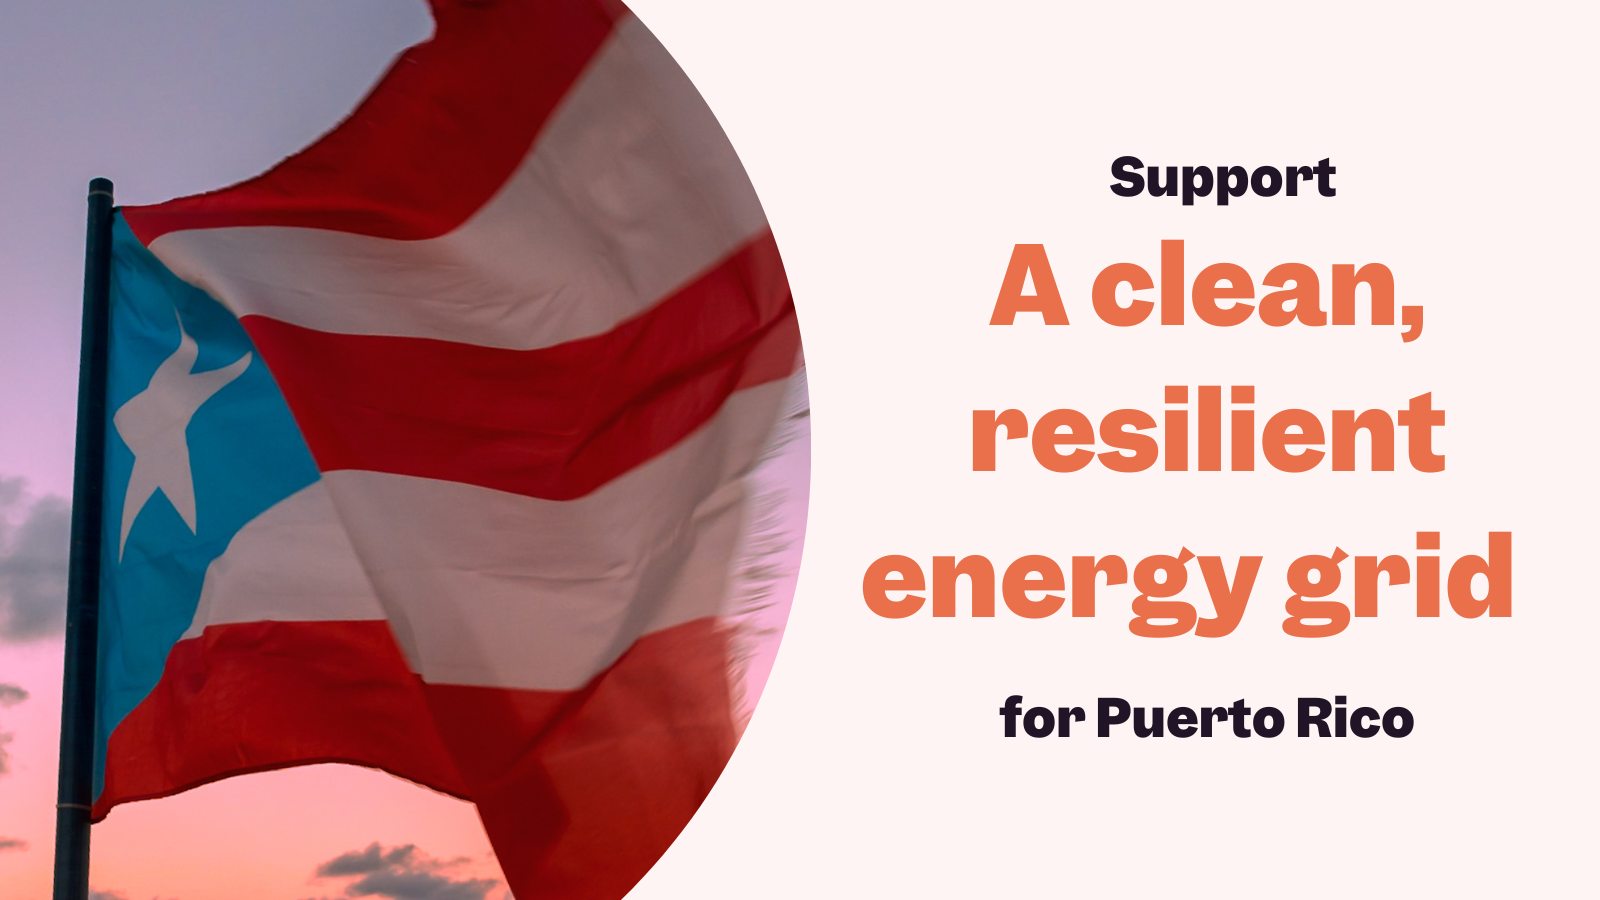 Puerto Rico needs structural solutions: our open letter to the Federal Emergency Management Agency